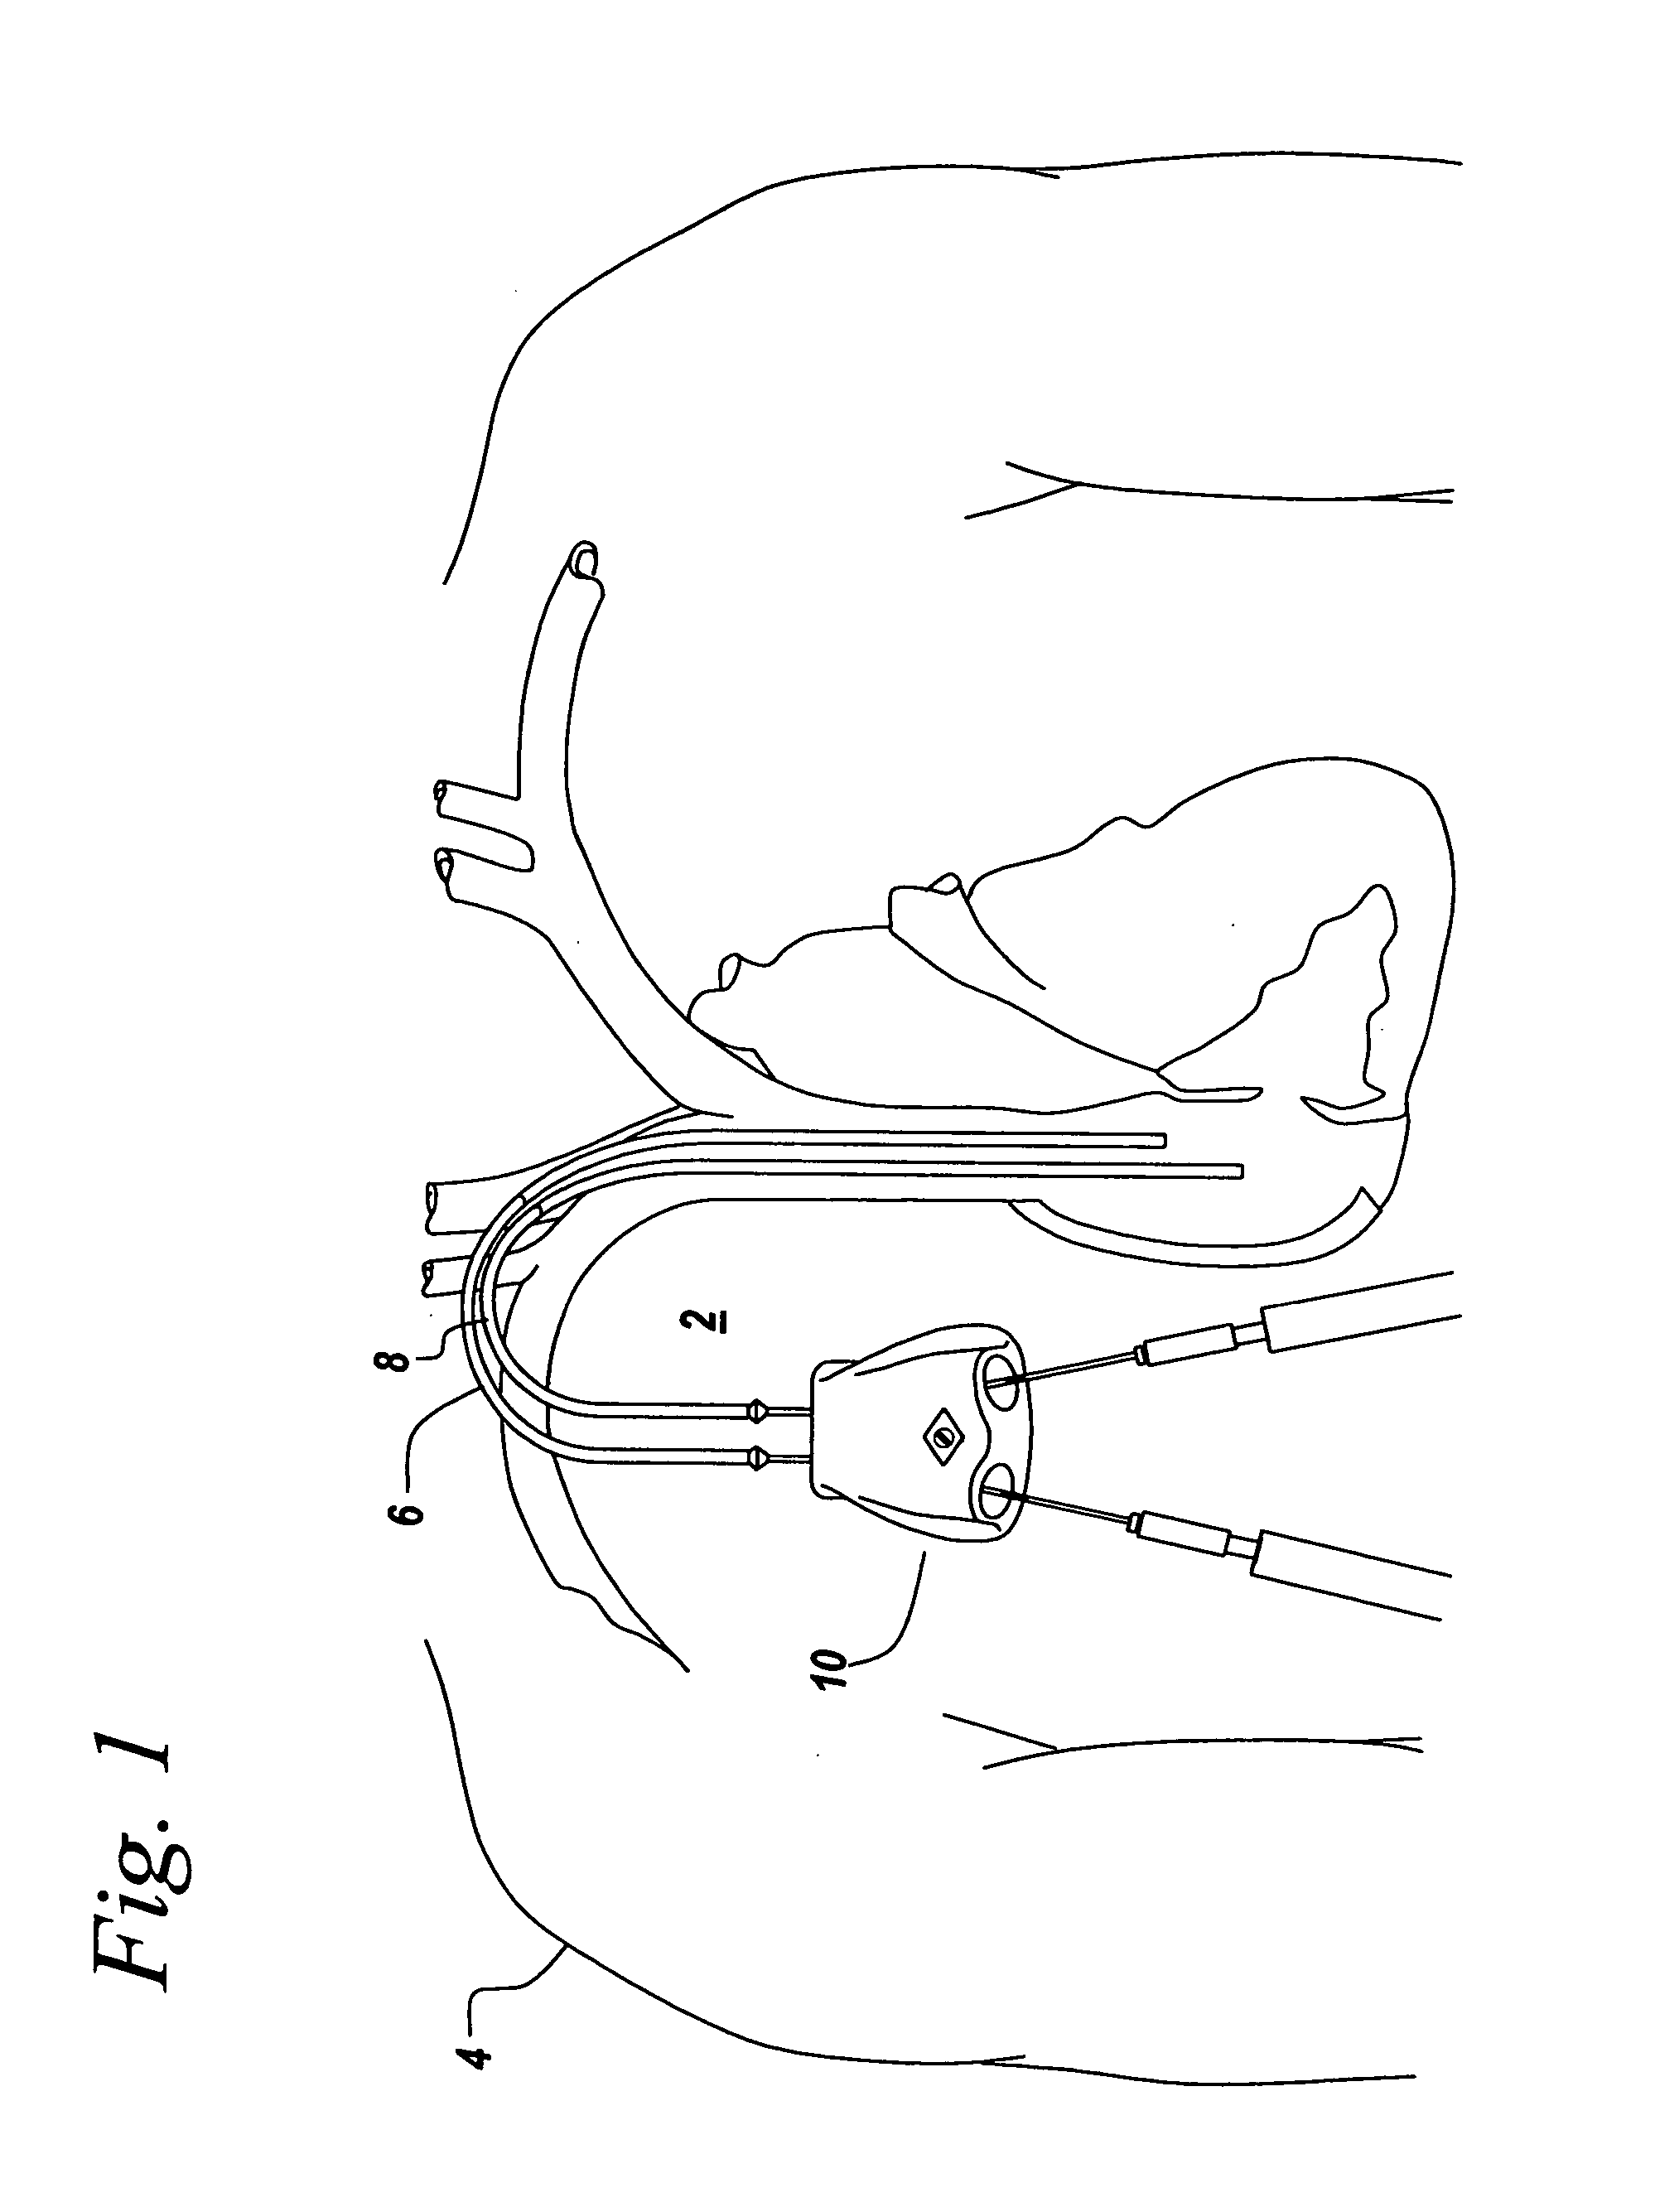 Subcutaneous needle connection system